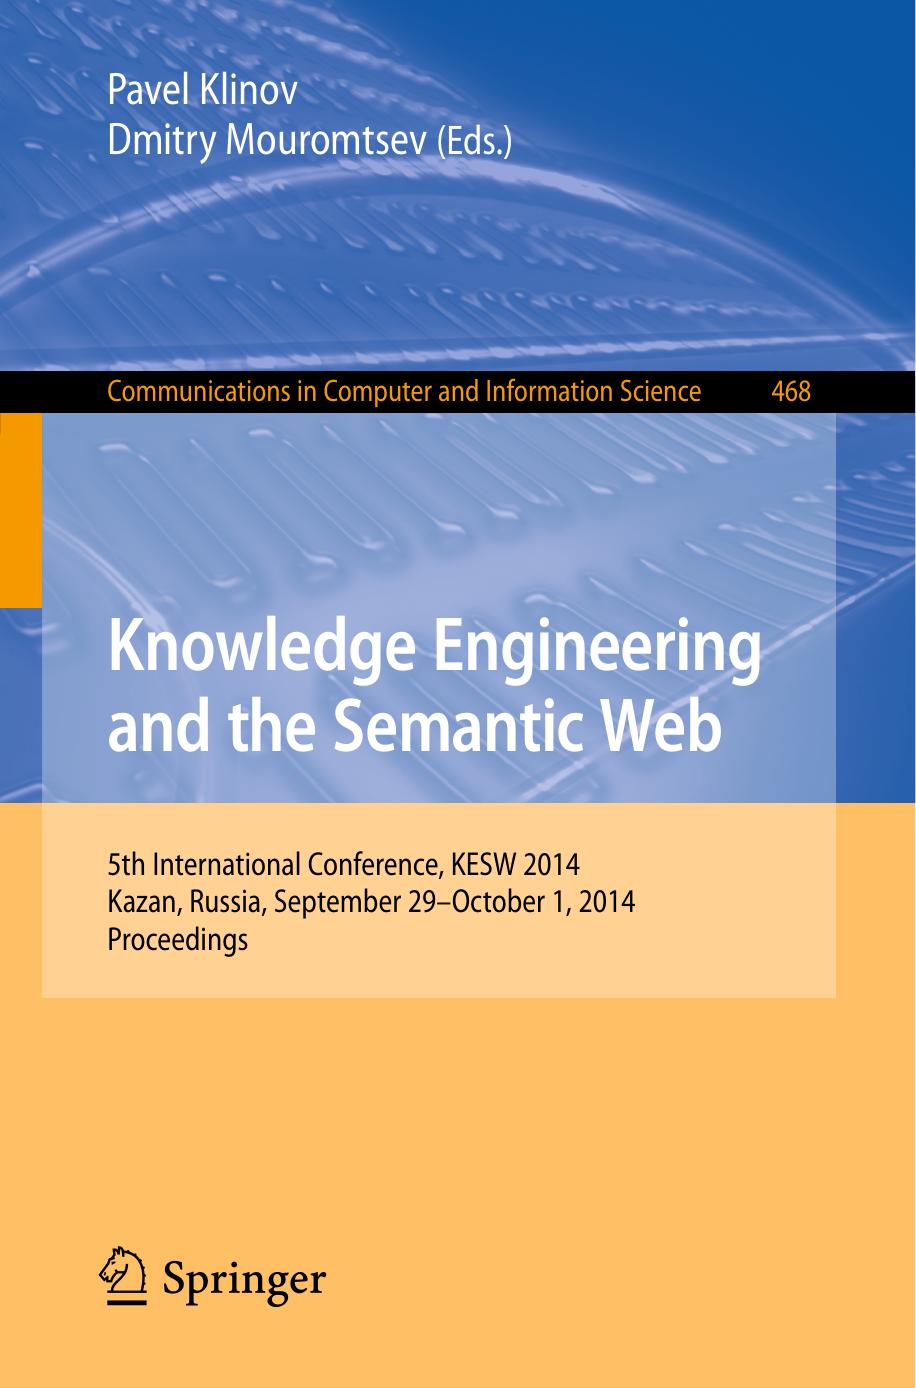 Knowledge Engineering and the Semantic Web: 5th International Conference, KESW 2014, Kazan, Russia, September 29--October 1, 2014. Proceedings